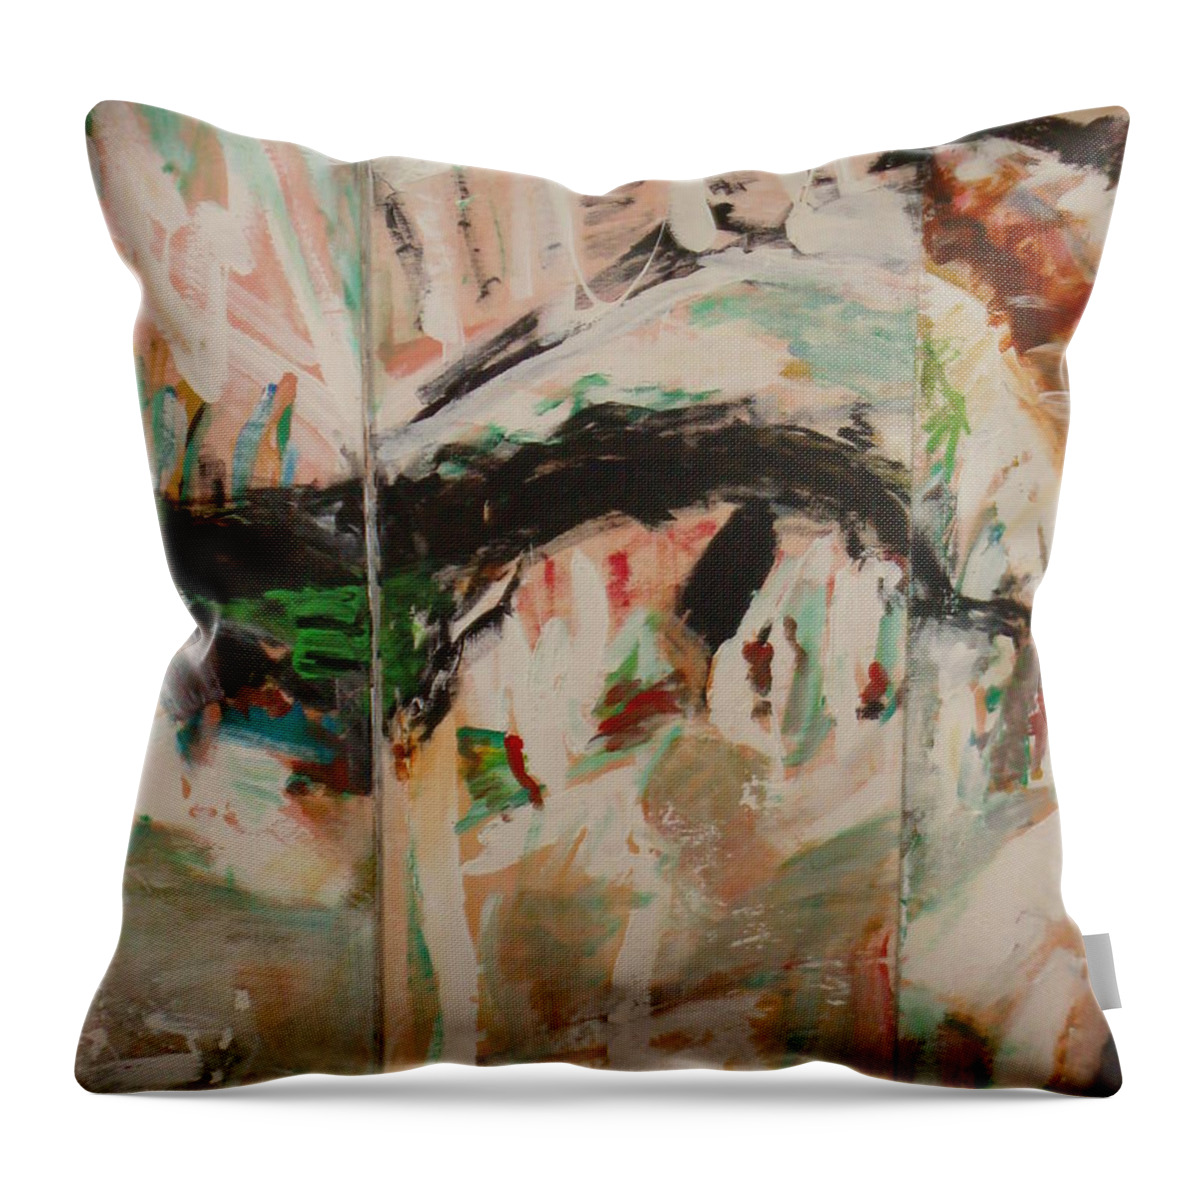 Time Throw Pillow featuring the painting Nostalgies Of Venice by Fereshteh Stoecklein